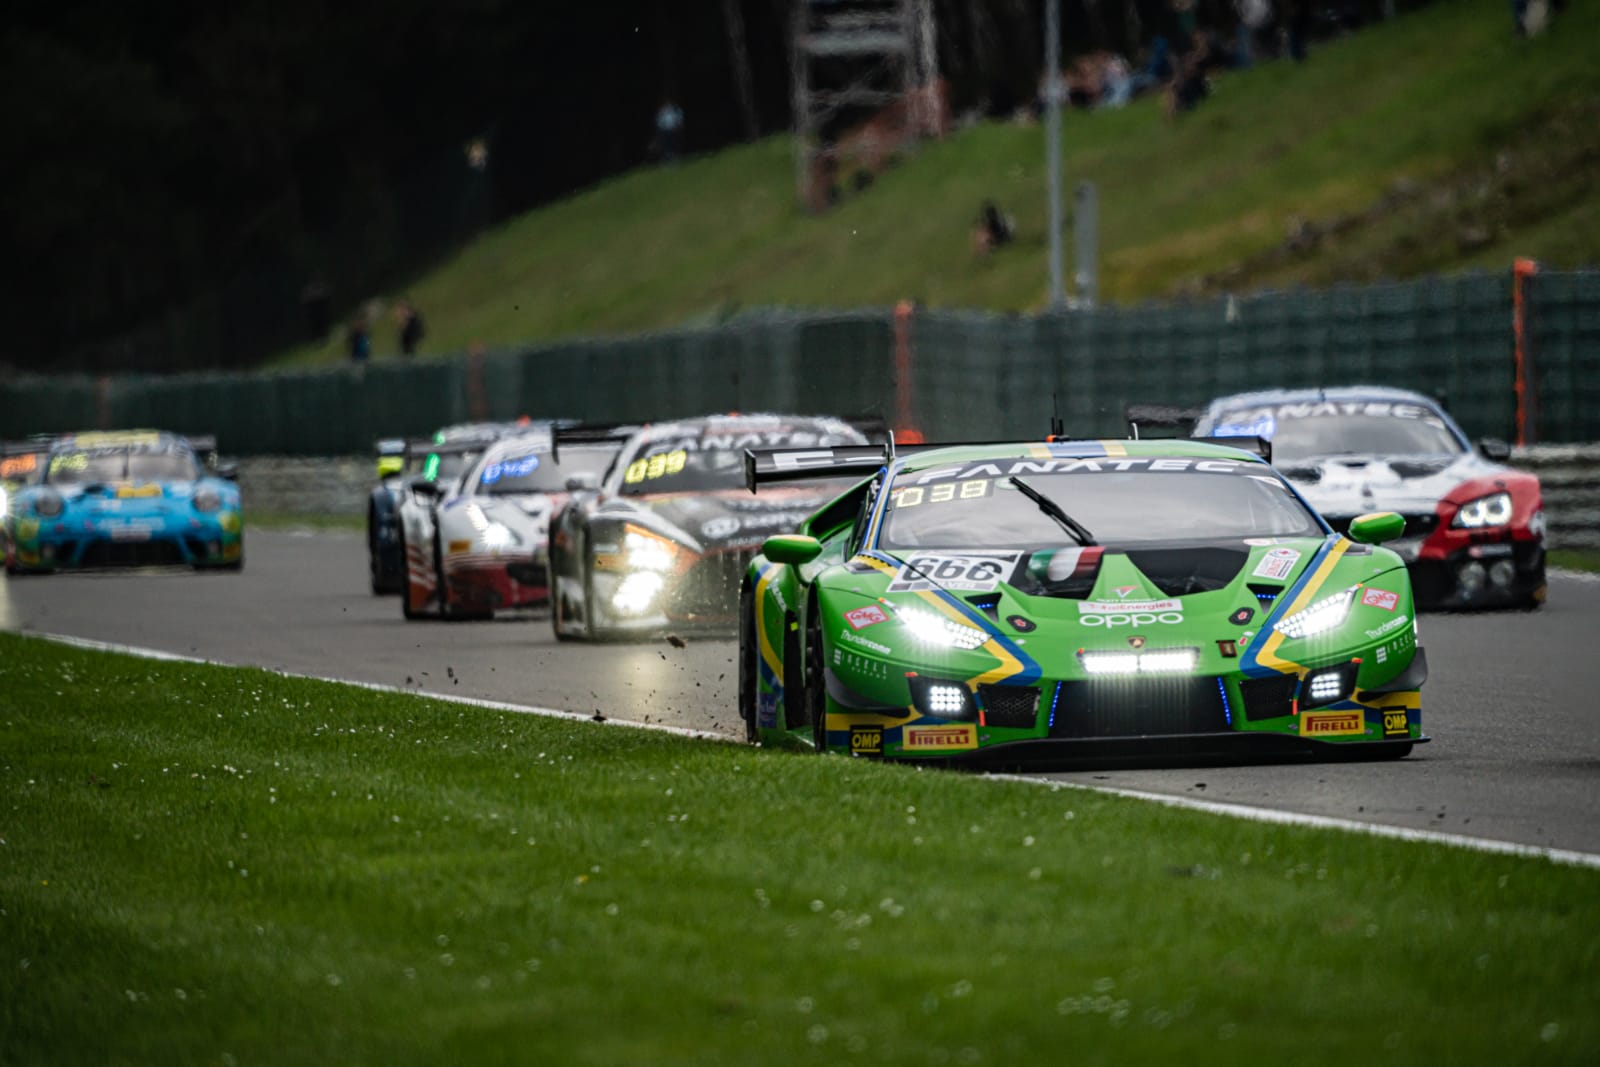 DRIVERS CONFIRMED FOR 2022 GT3 PROGRAMMES